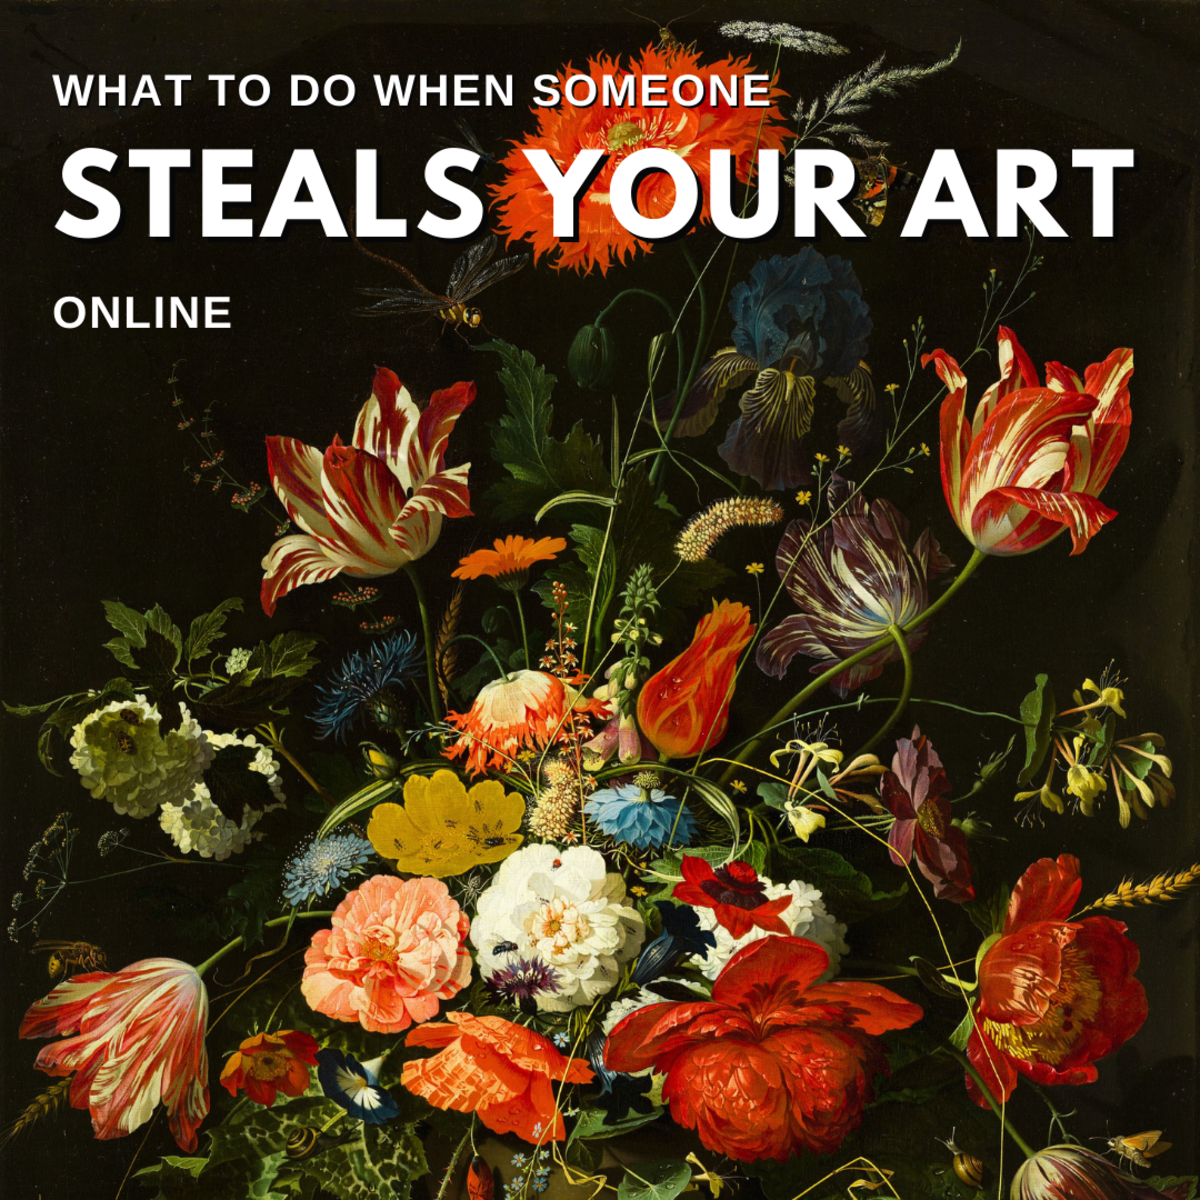 What to Do About Online Art Theft & Plagiarism